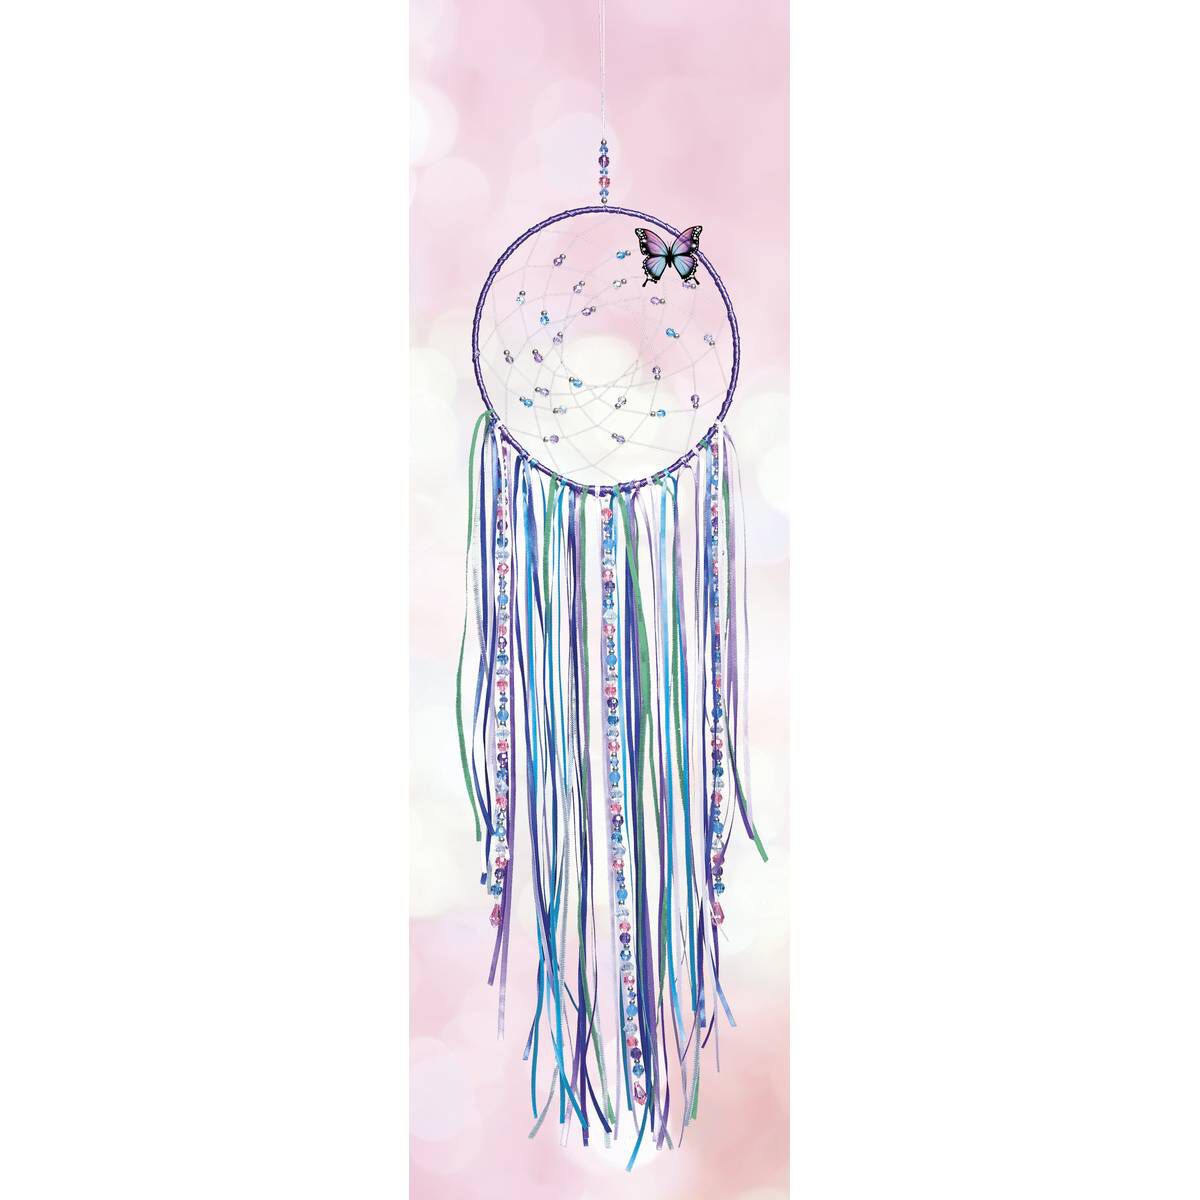 Includes Dream Catcher Hoop Strings and Ribbons DIY Dreamcatcher Beads Make It Real Butterfly Pin and More Make Your Own Dream Catcher Arts and Crafts Kit for Tween Girls 